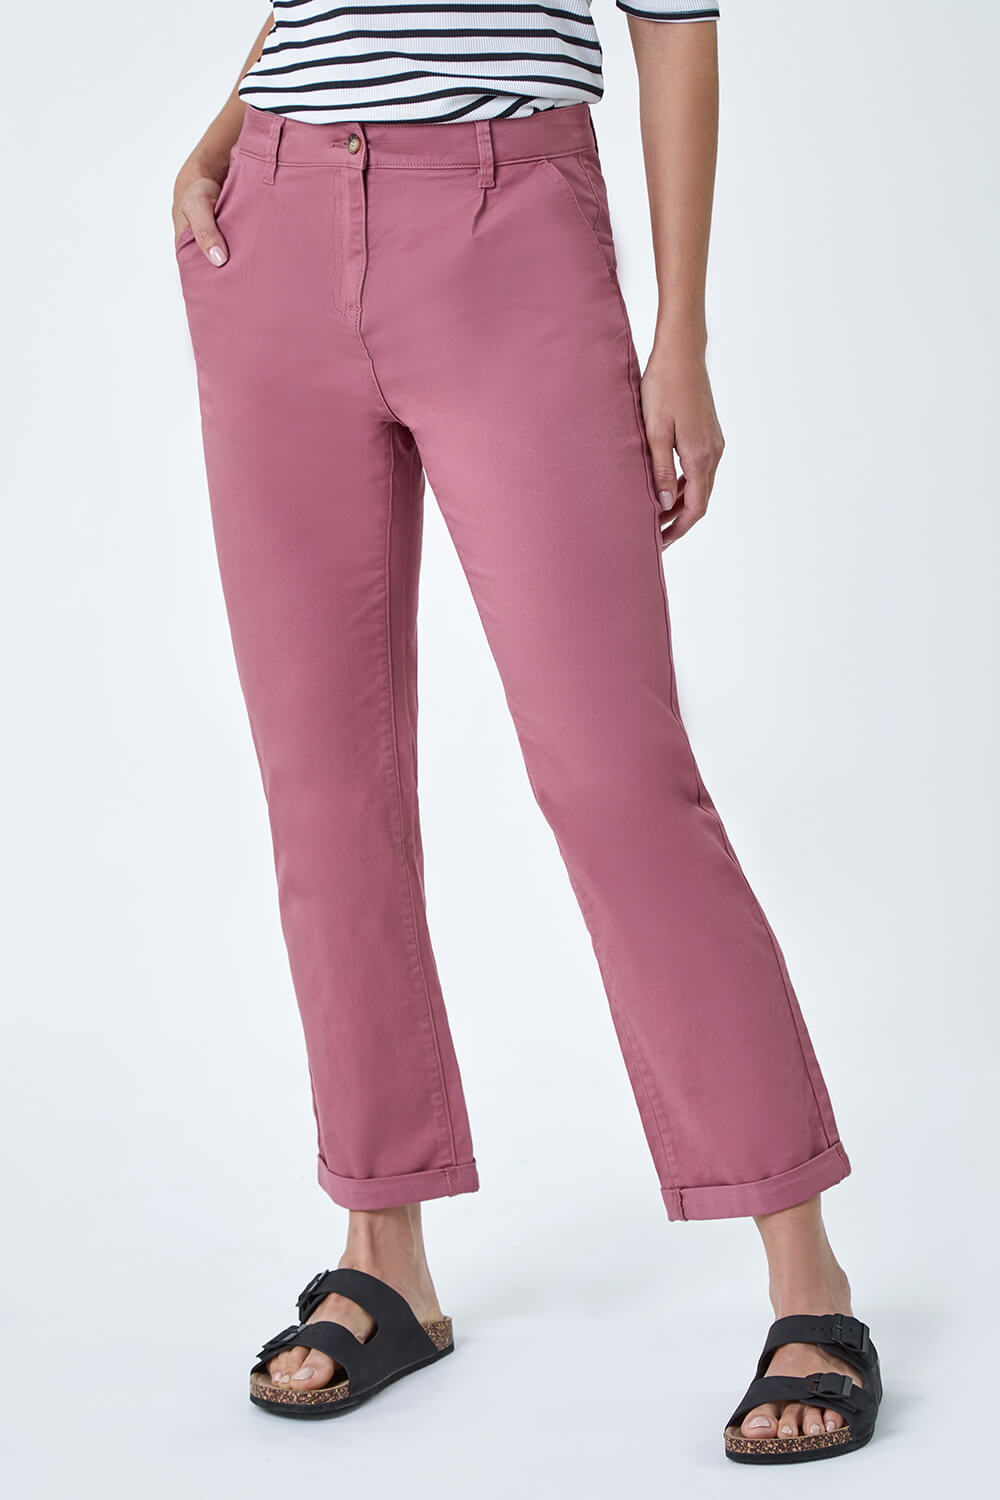 Rose Cotton Blend Washed Chino Trousers, Image 4 of 5